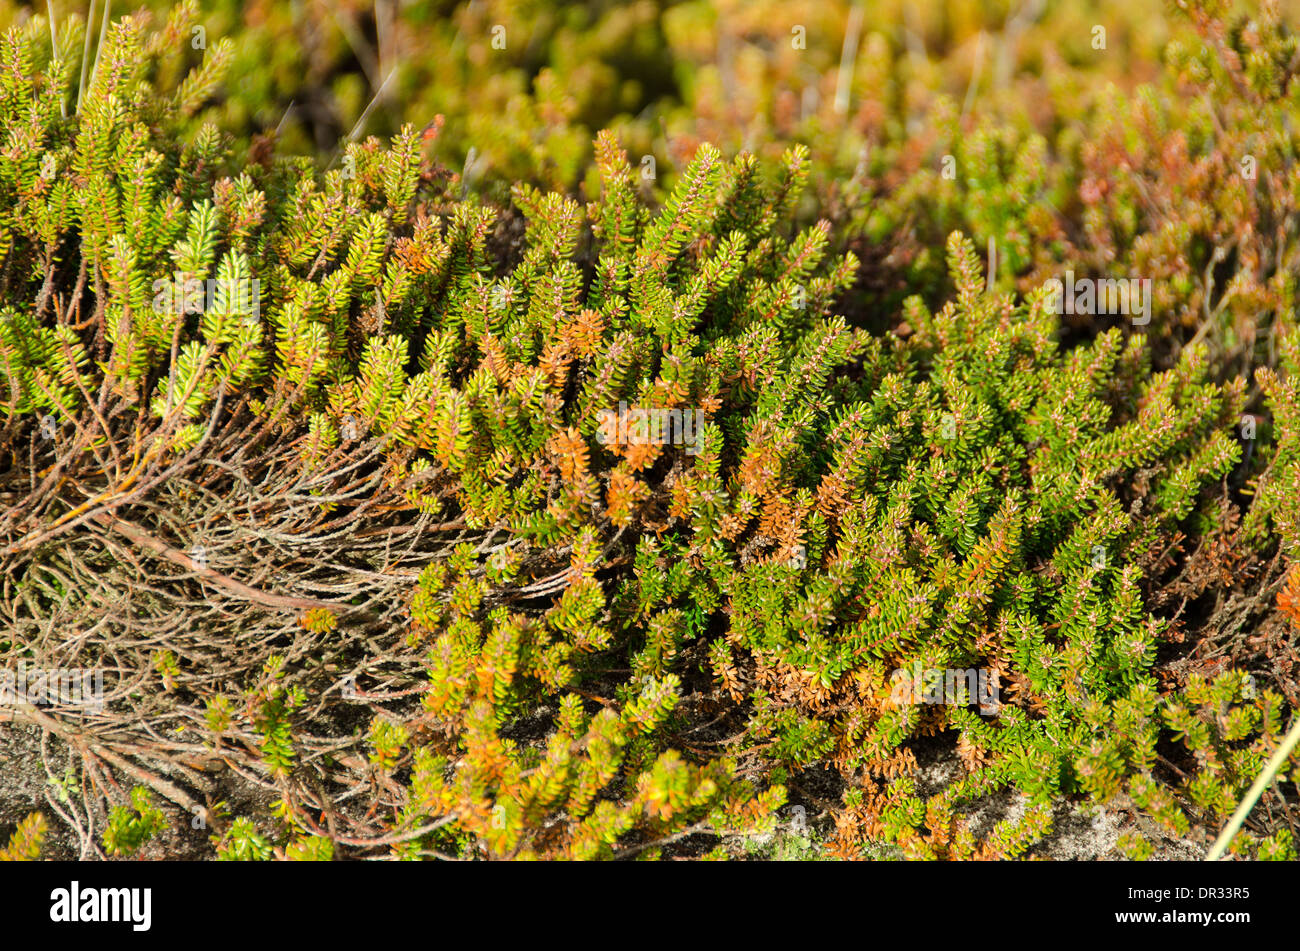 Coastal landscape with typical empetrum or crowberry plants Stock Photo